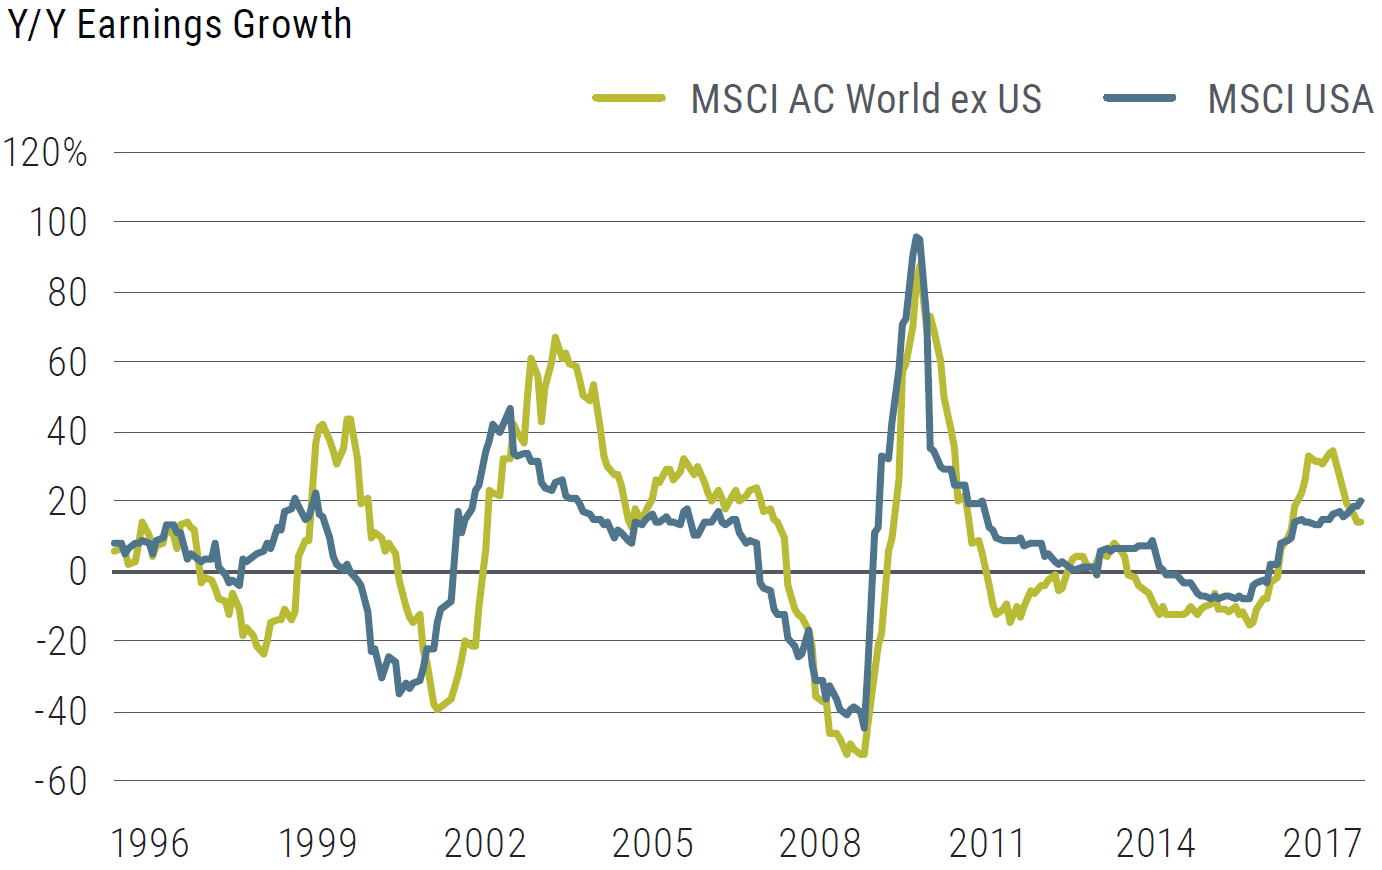 Figure 5 shows a graph of the year-over-year earnings growth for world ex U.S. and the U.S., over the time period 1996 to November 2018. Earnings growth peaked for the MSCI AC World ex U.S. companies in early 2018 and has fallen since to about 18% by late 2018, while earnings growth for MSCI USA companies has been rising since 2016, reaching an average of 20% over the same period